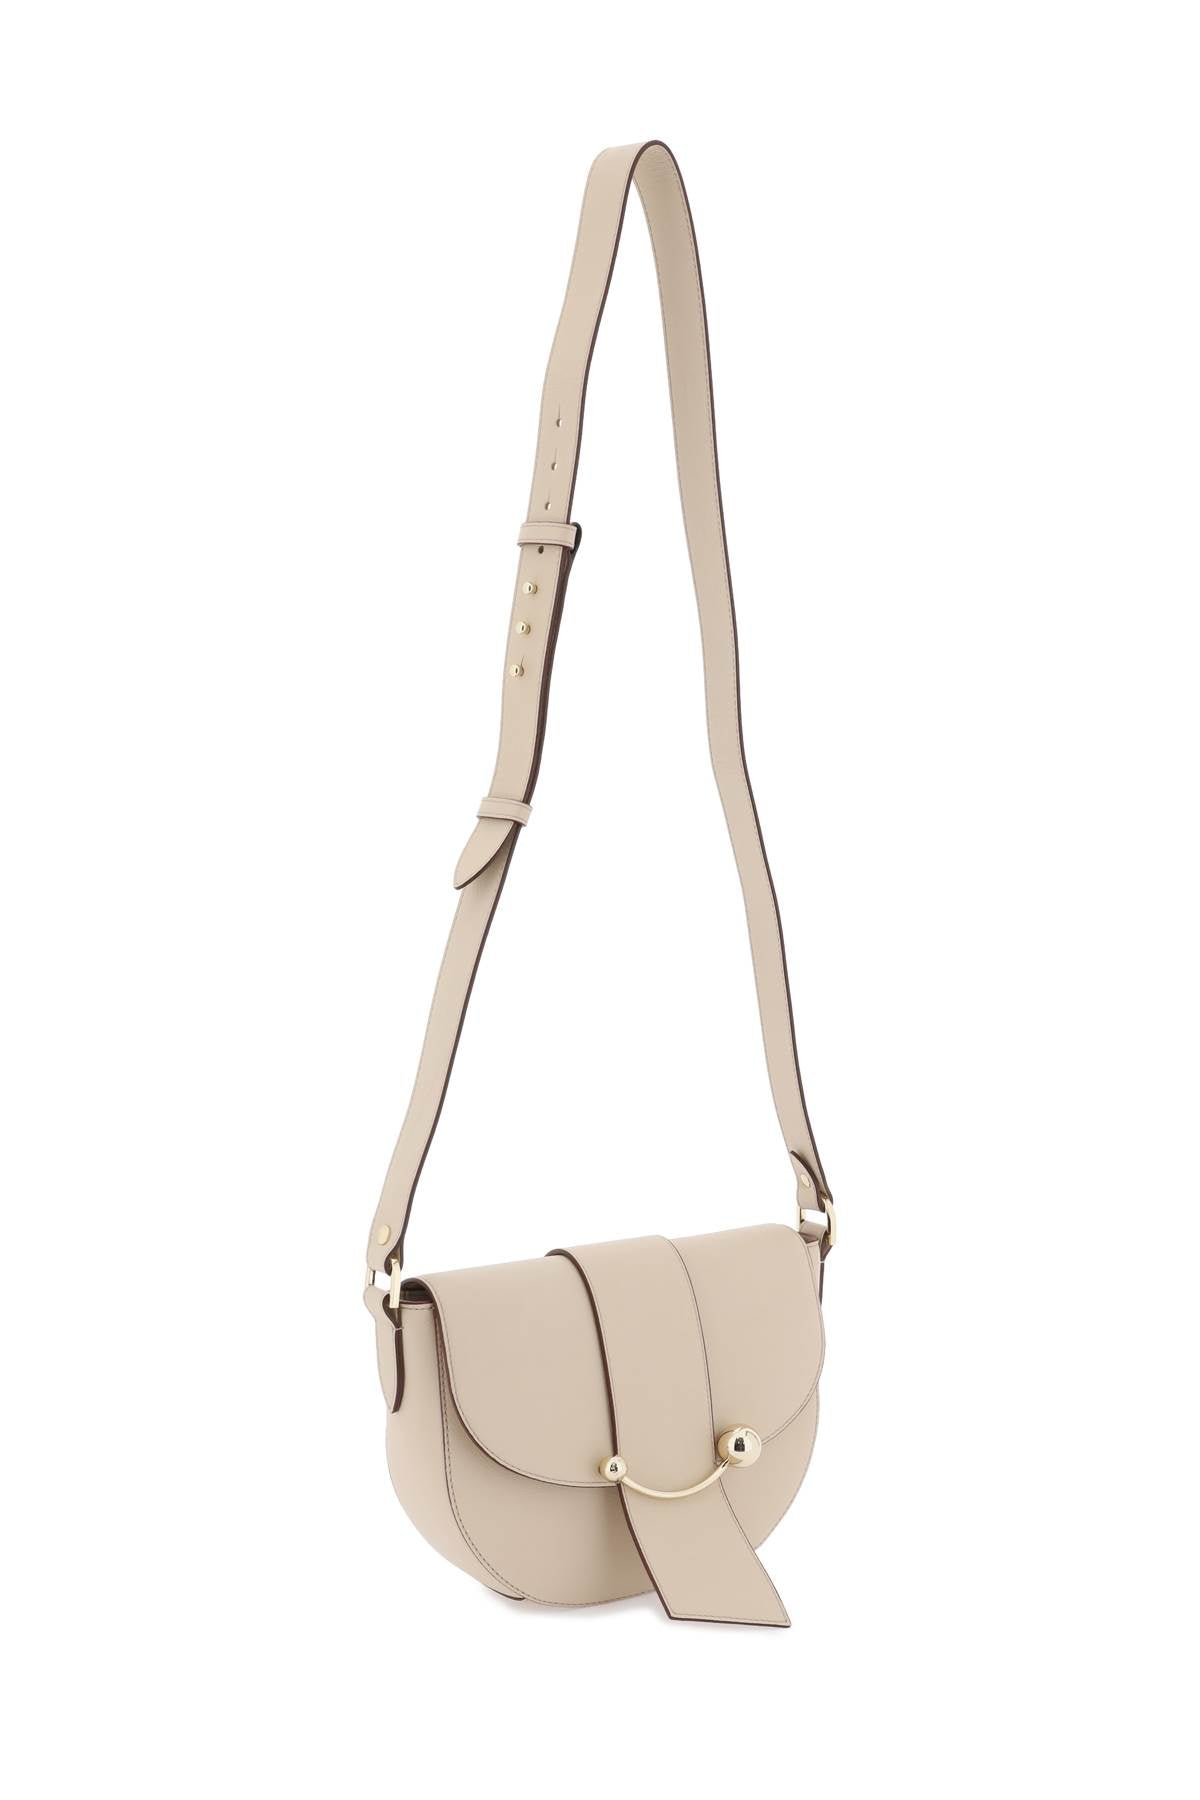 STRATHBERRY Beige Leather Crescent Crossbody Handbag for Women - SS24 Collection